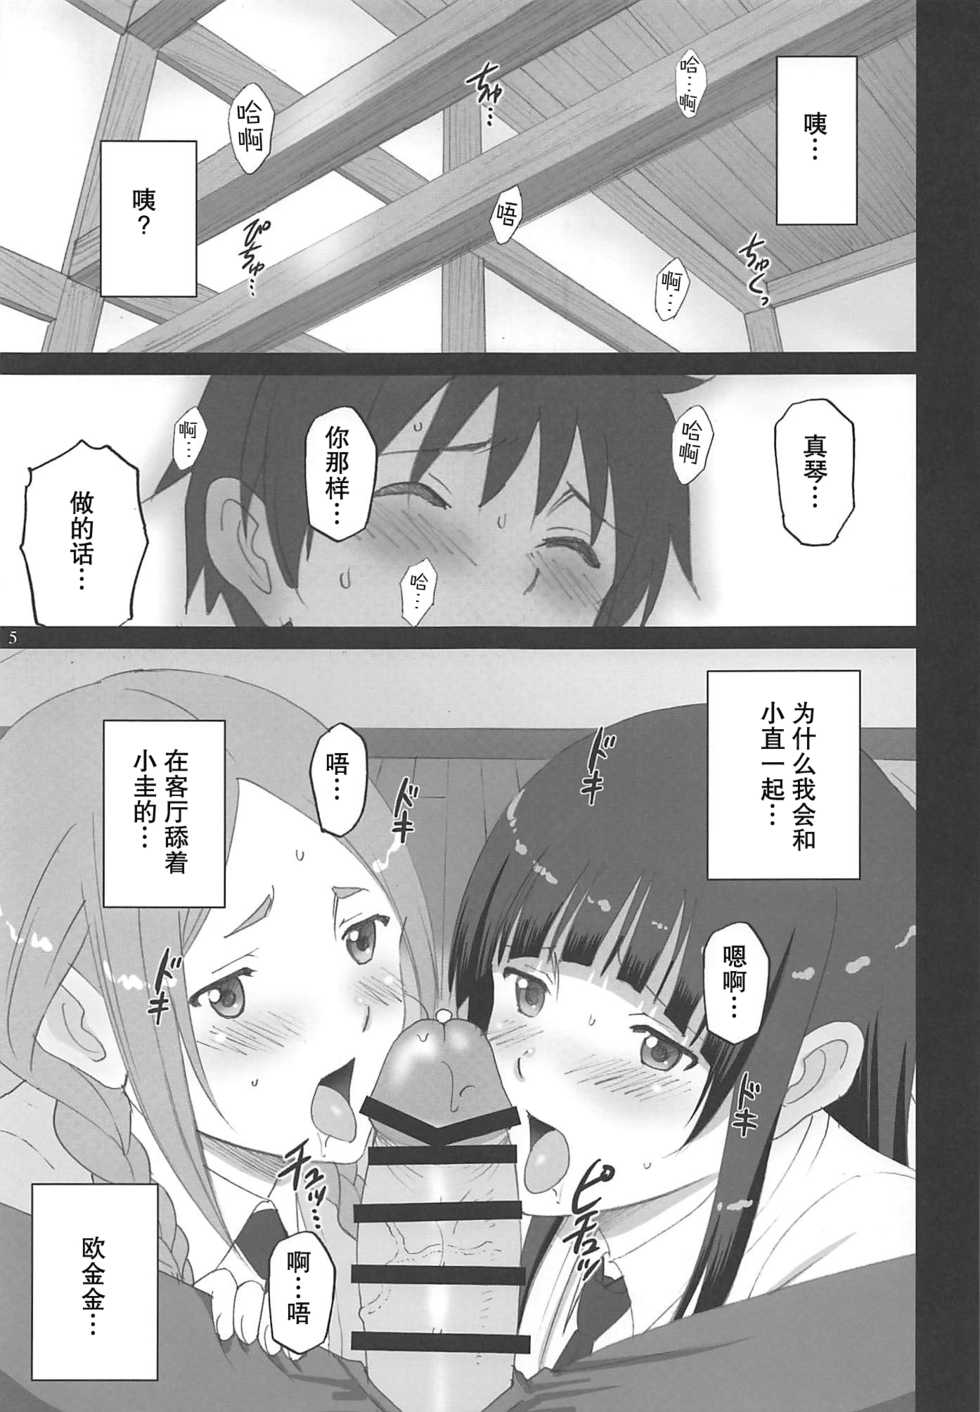 [ACTIVA (SMAC)] Fellaing Witch (Flying Witch) [Chinese] [2016-08-28] - Page 5